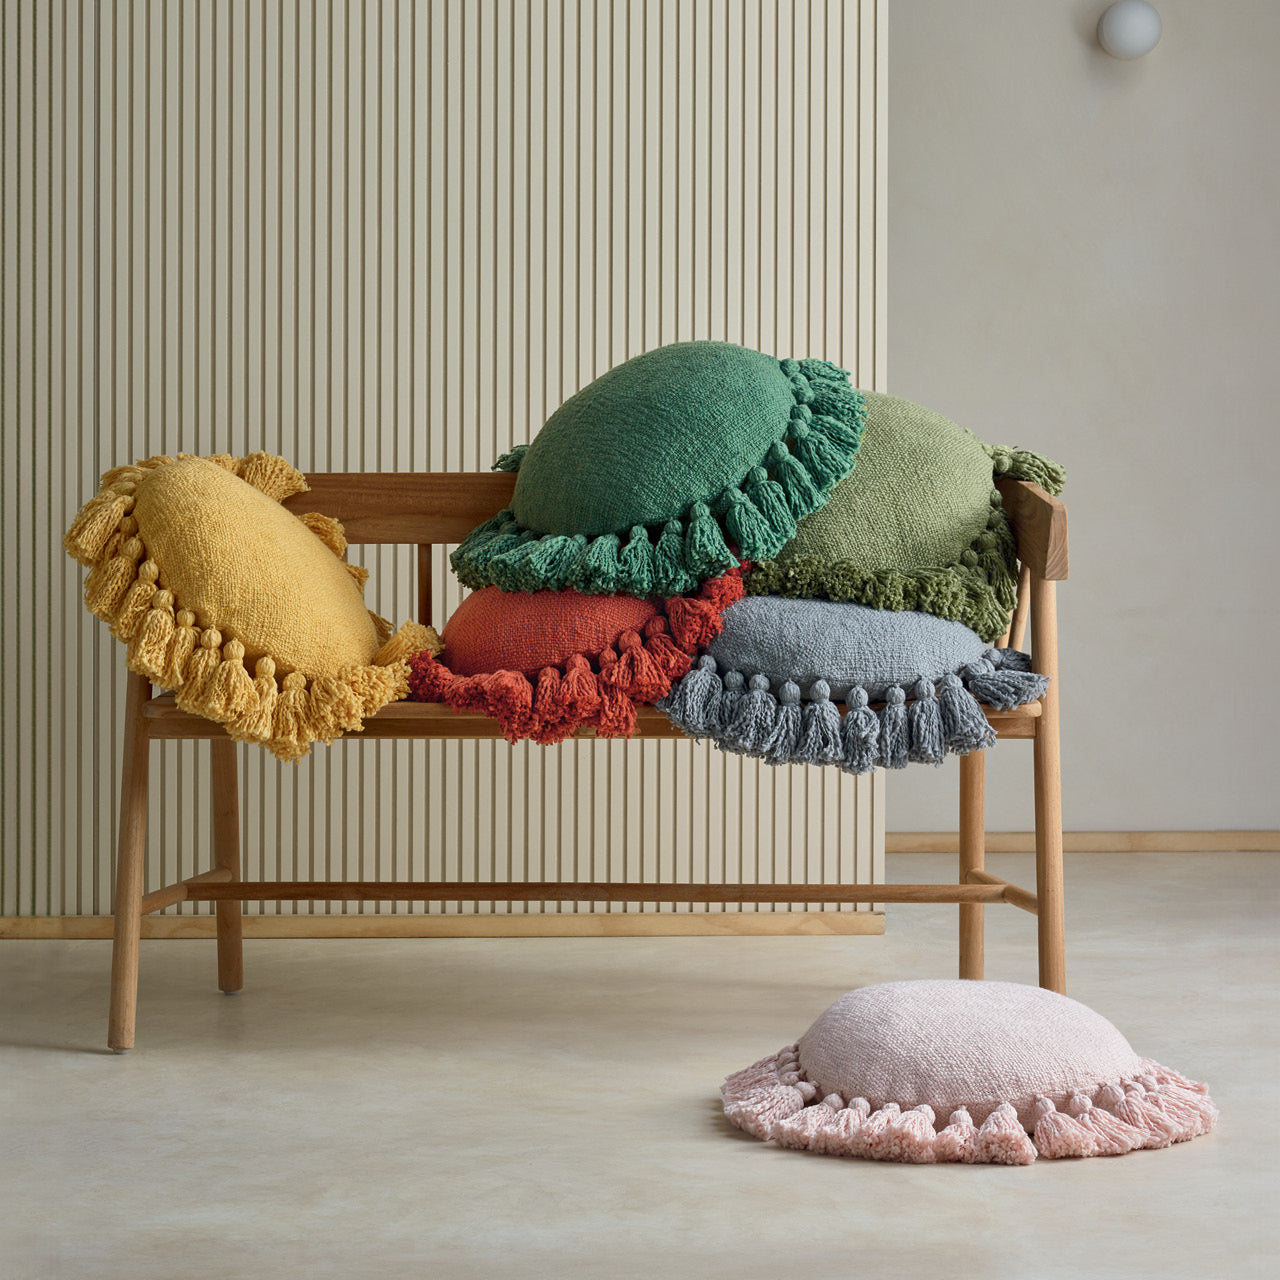 Group shot of Cadence Cushions on a bench